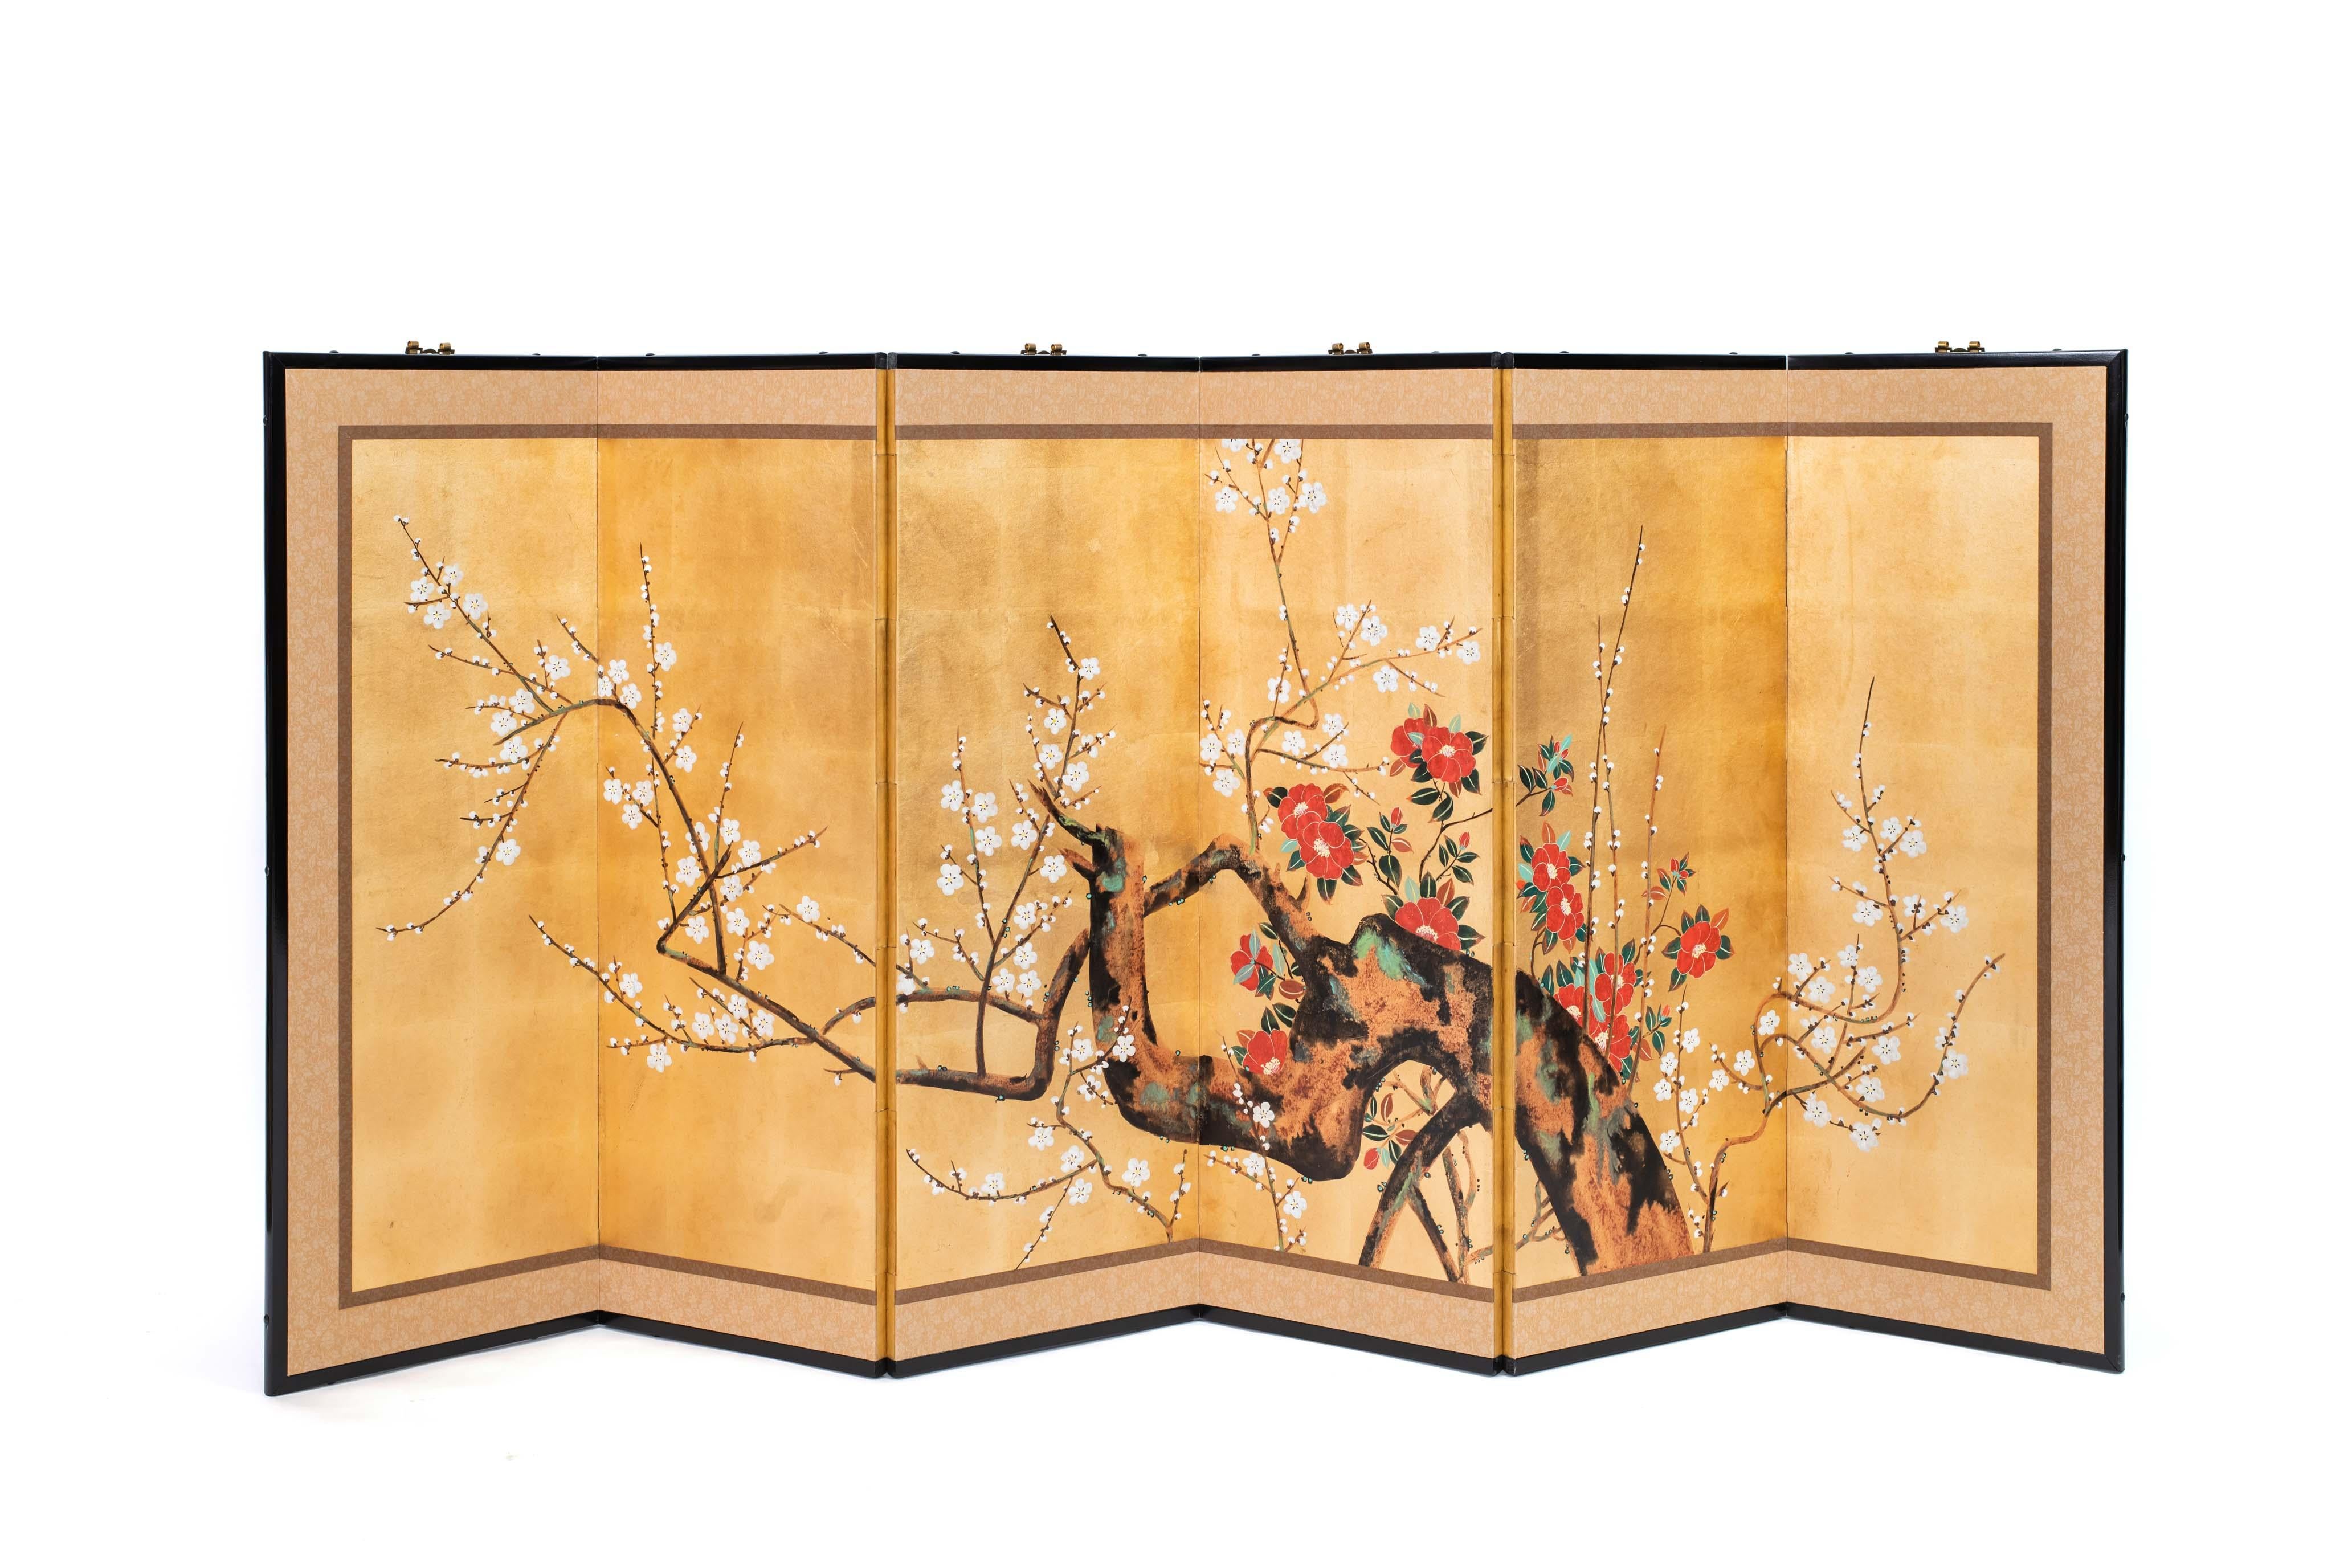 The red and white plum blossom painting of this six-panel screen is hand-painted in watercolor, on squares of gold leaf which are applied by hand to the paper base over carefully jointed wooden lattice frames. Lacquered wooden rails are then applied